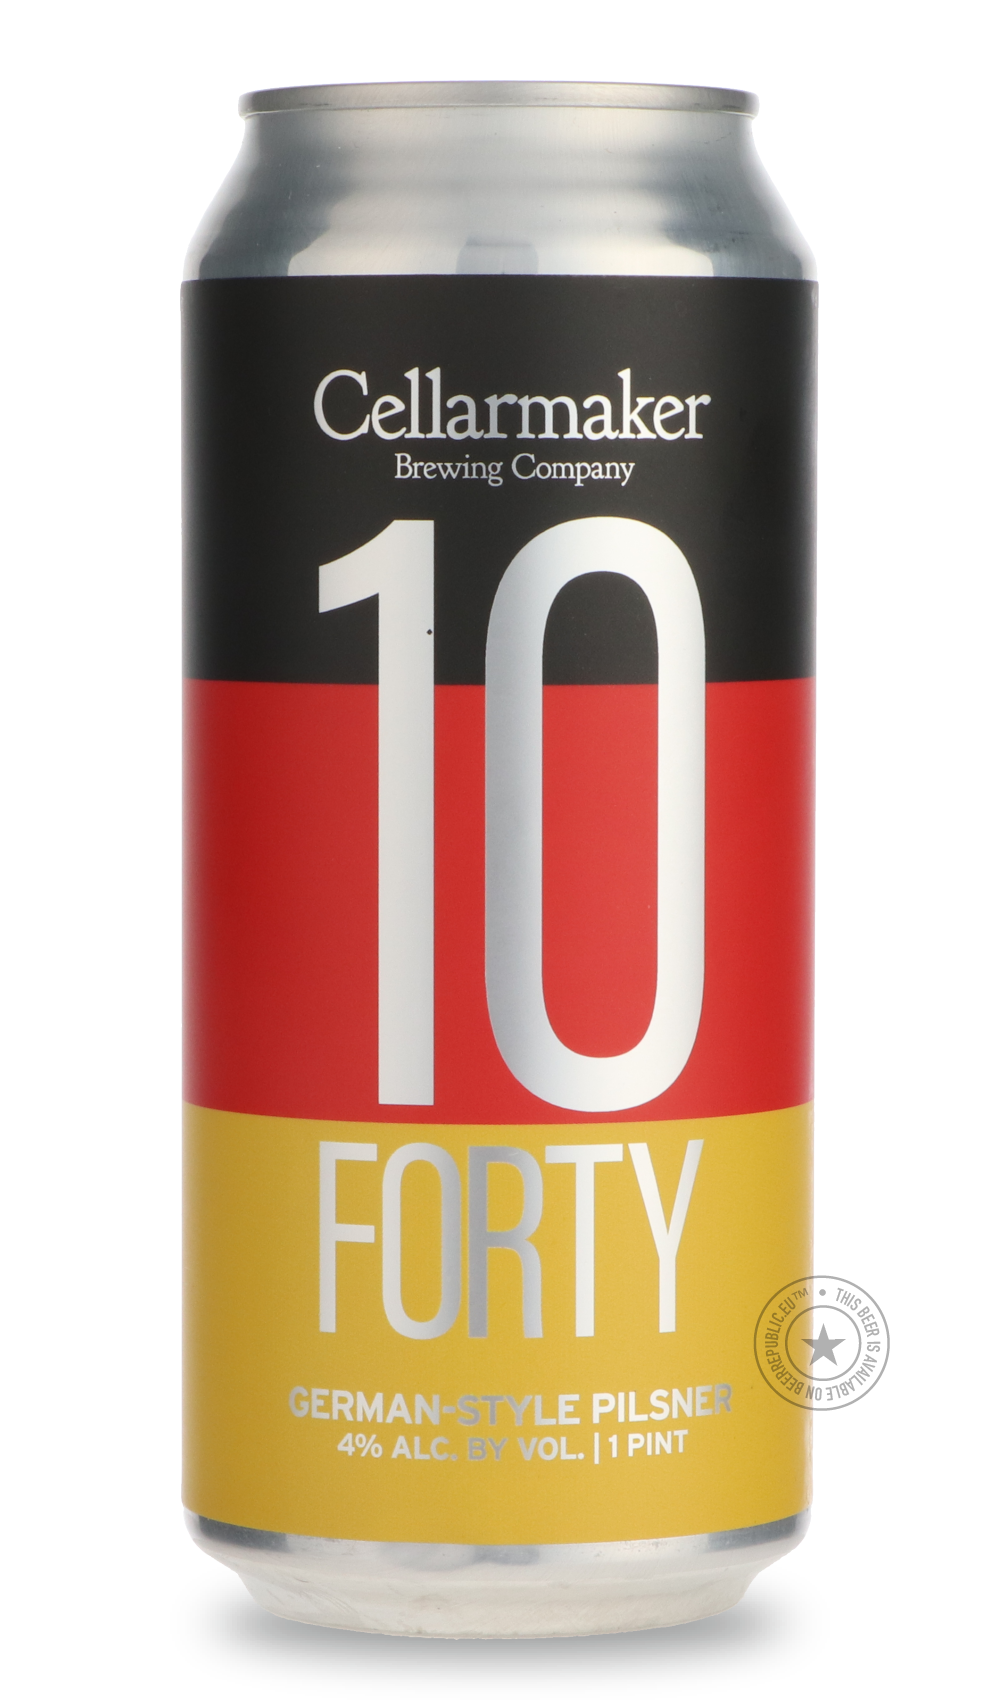 -Cellarmaker- 10 Forty / Urban Roots-Pale / Blonde- Only @ Beer Republic - The best online beer store for American & Canadian craft beer - Buy beer online from the USA and Canada - Bier online kopen - Amerikaans bier kopen - Craft beer store - Craft beer kopen - Amerikanisch bier kaufen - Bier online kaufen - Acheter biere online - IPA - Stout - Porter - New England IPA - Hazy IPA - Imperial Stout - Barrel Aged - Barrel Aged Imperial Stout - Brown - Dark beer - Blond - Blonde - Pilsner - Lager - Wheat - Wei